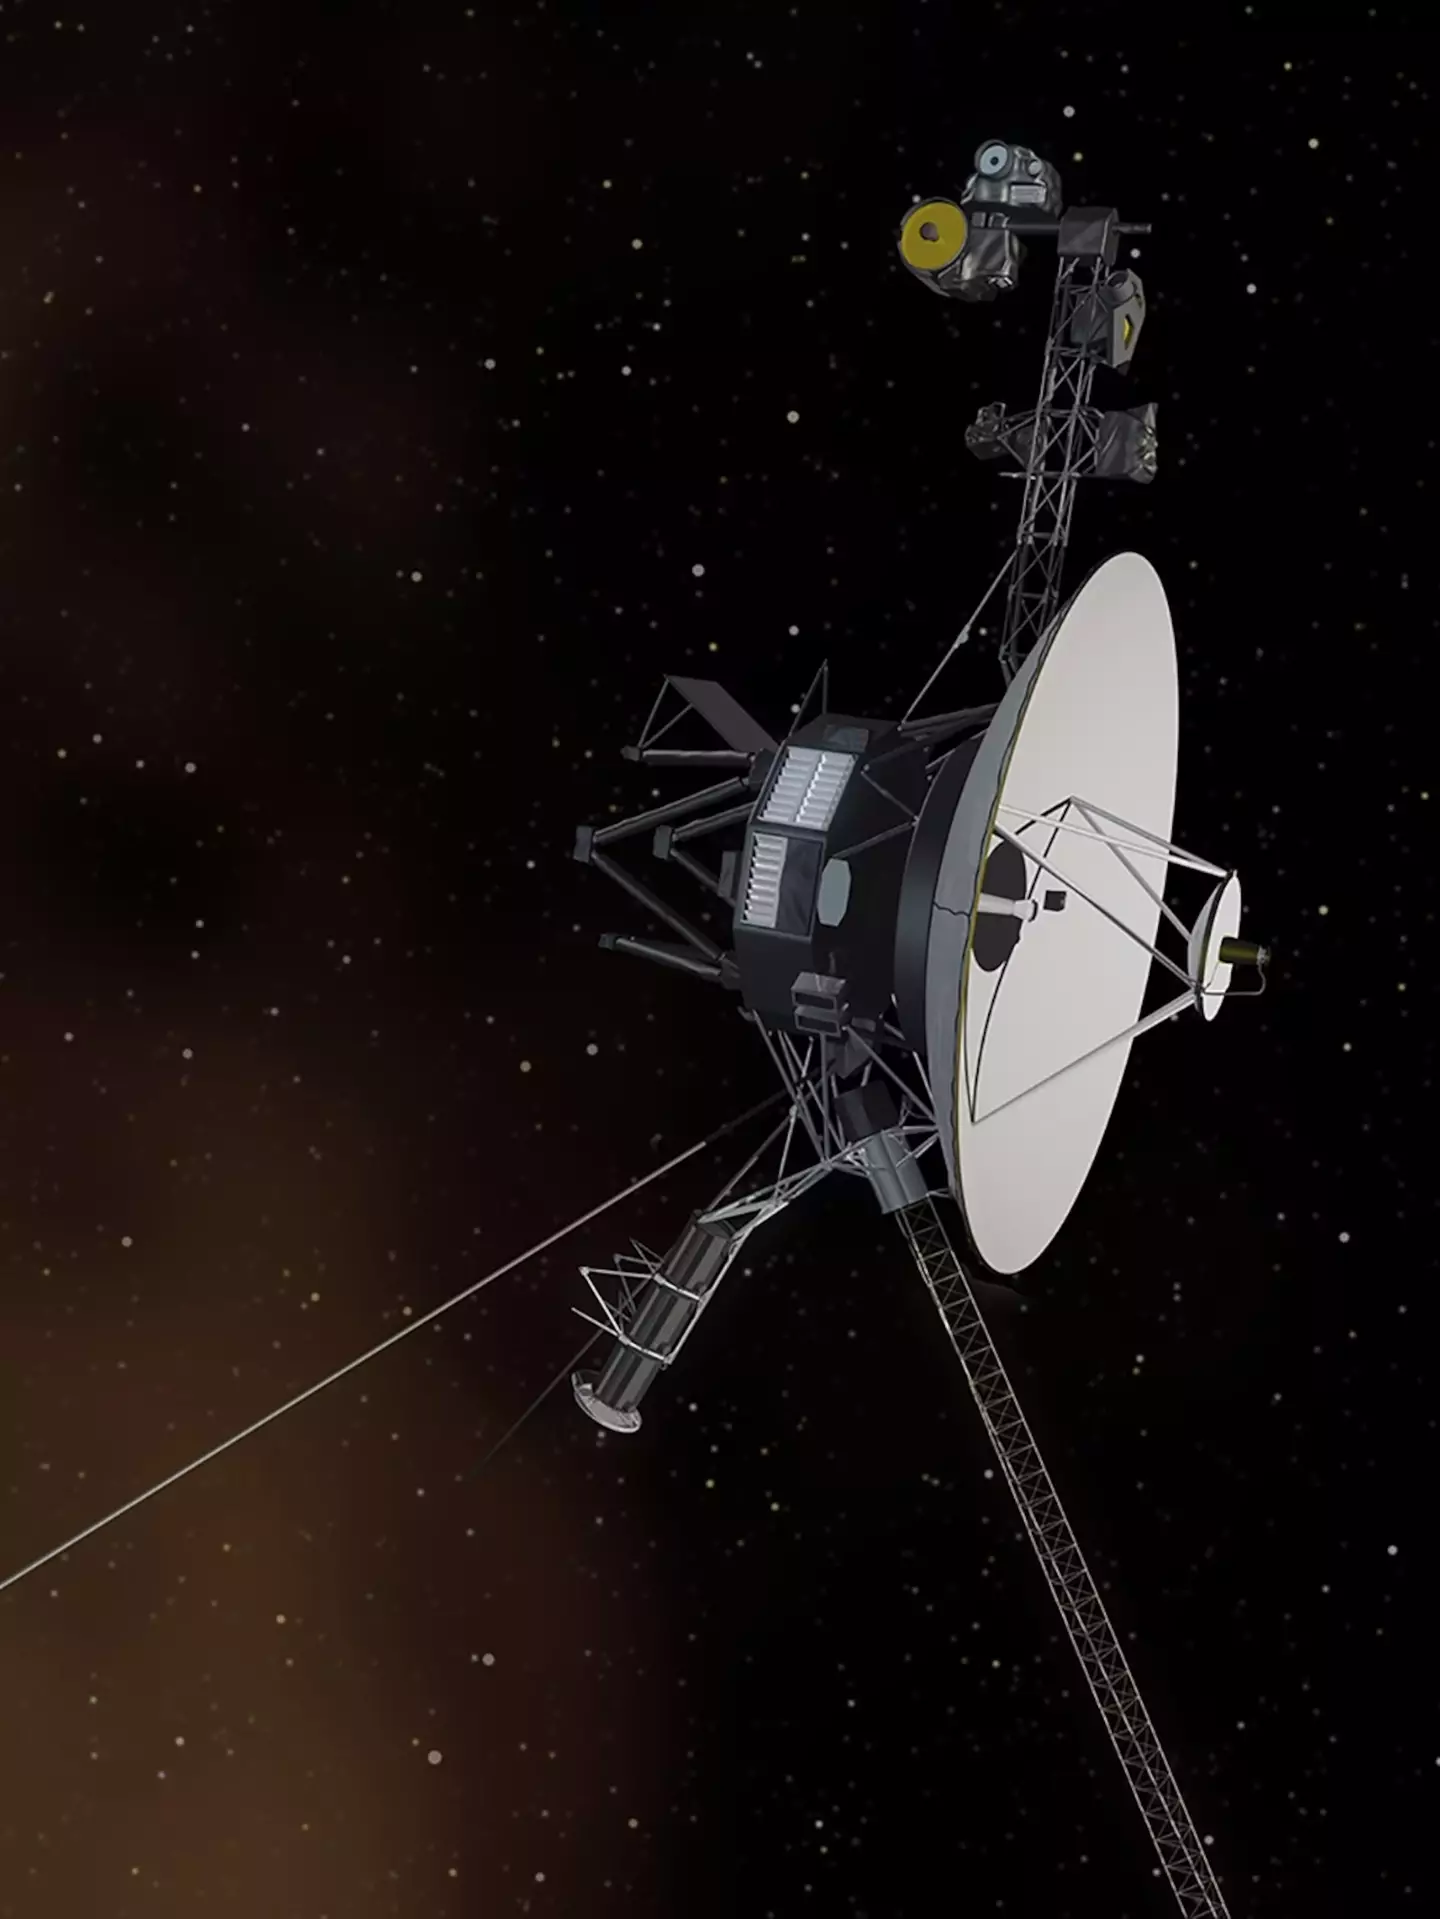 NASA has received a small glimmer of hope after losing contact with the Voyager 2 probe, 12 billion miles away in the galaxy.